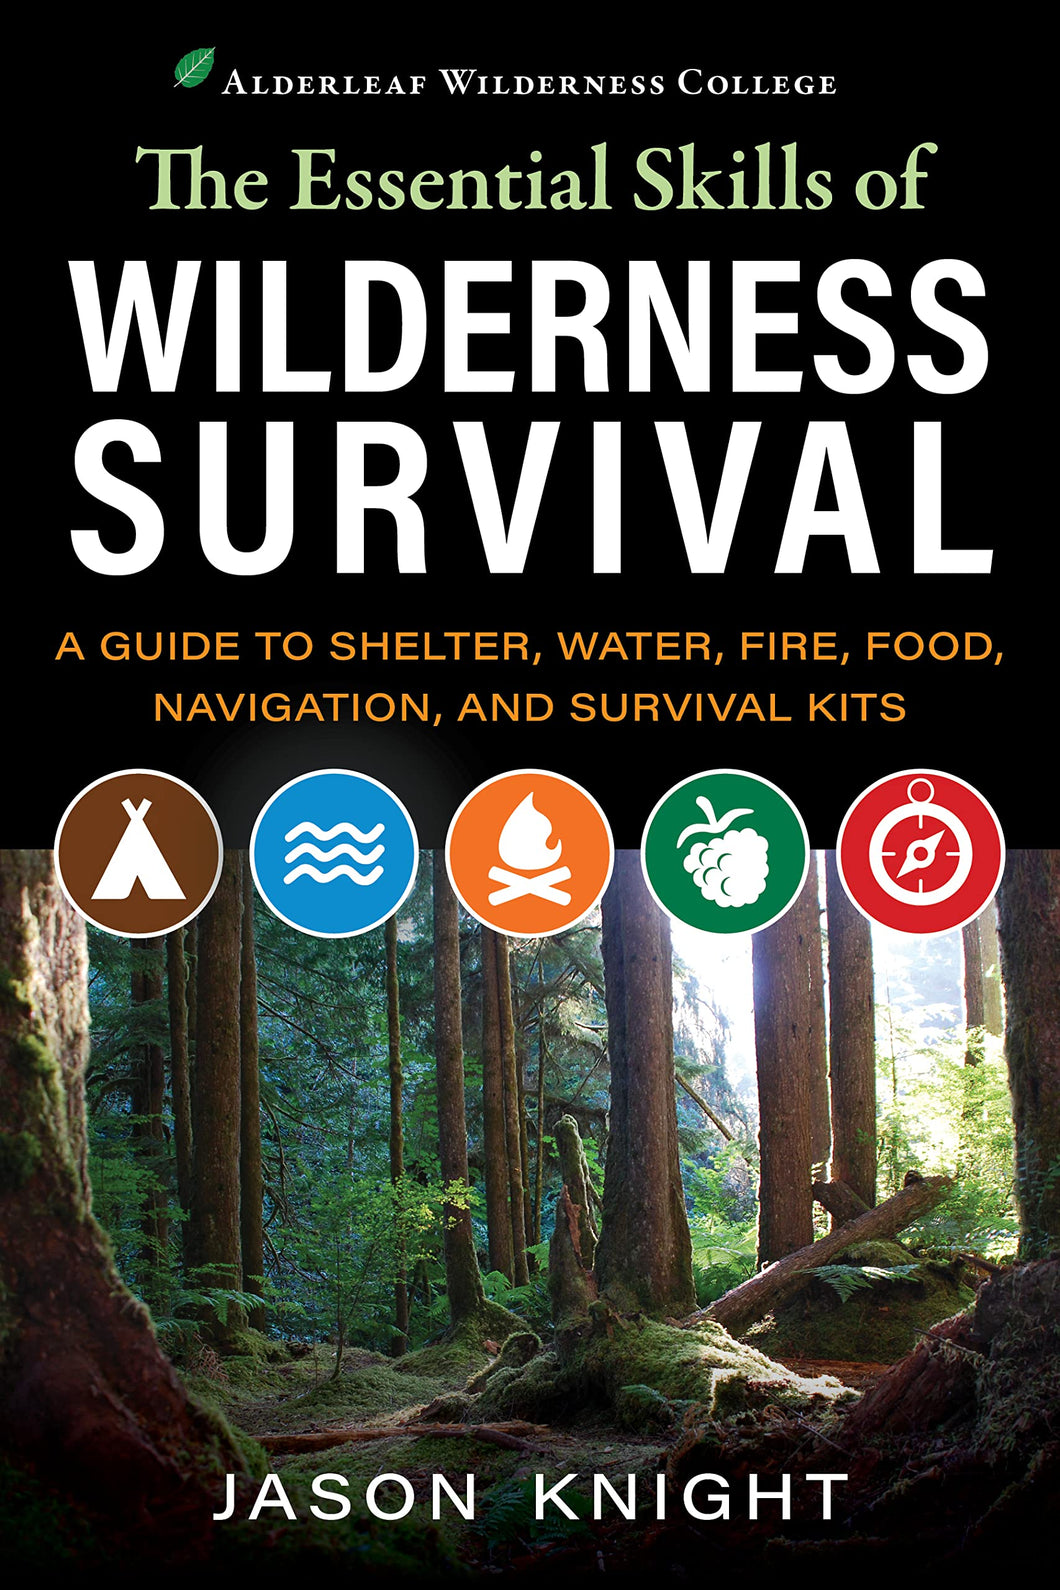 The Essential Skills of Wilderness Survival: A Guide to Shelter, Water, Fire, Food, Navigation, and Survival Kits